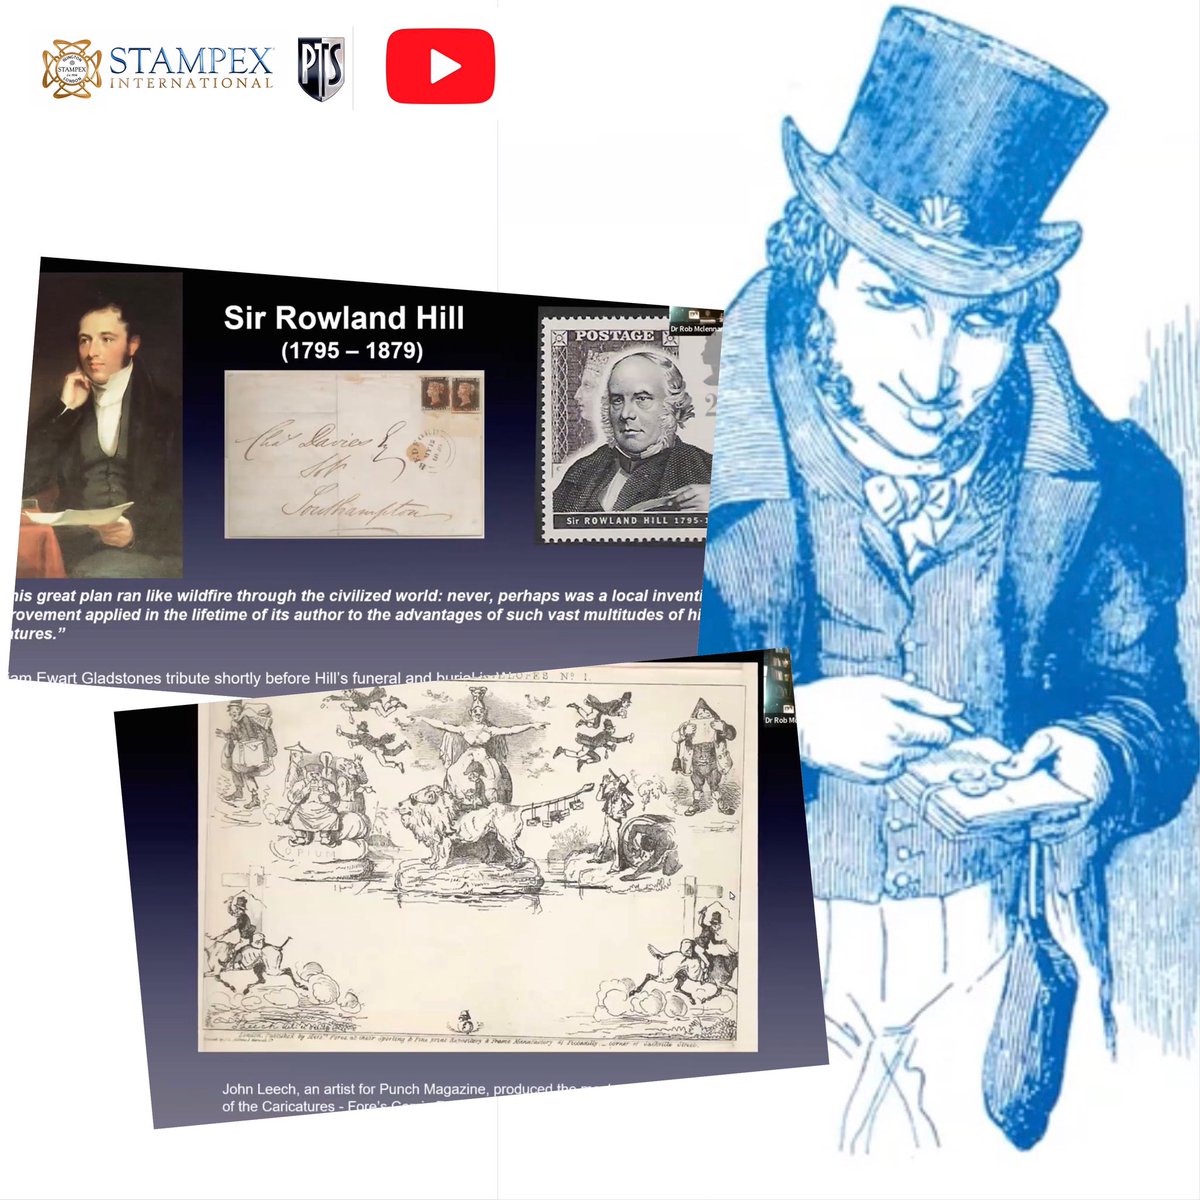 Watch the fascinating story of Rowland Hill, the founder of the adhesive postage stamp, told by his direct descendant, Dr. Rob McClennan-Smith. youtu.be/4UD7U-By47I?si… Don’t forget to subscribe to our YouTube channel @ptsandstampex to see our next upload! This Talk was…